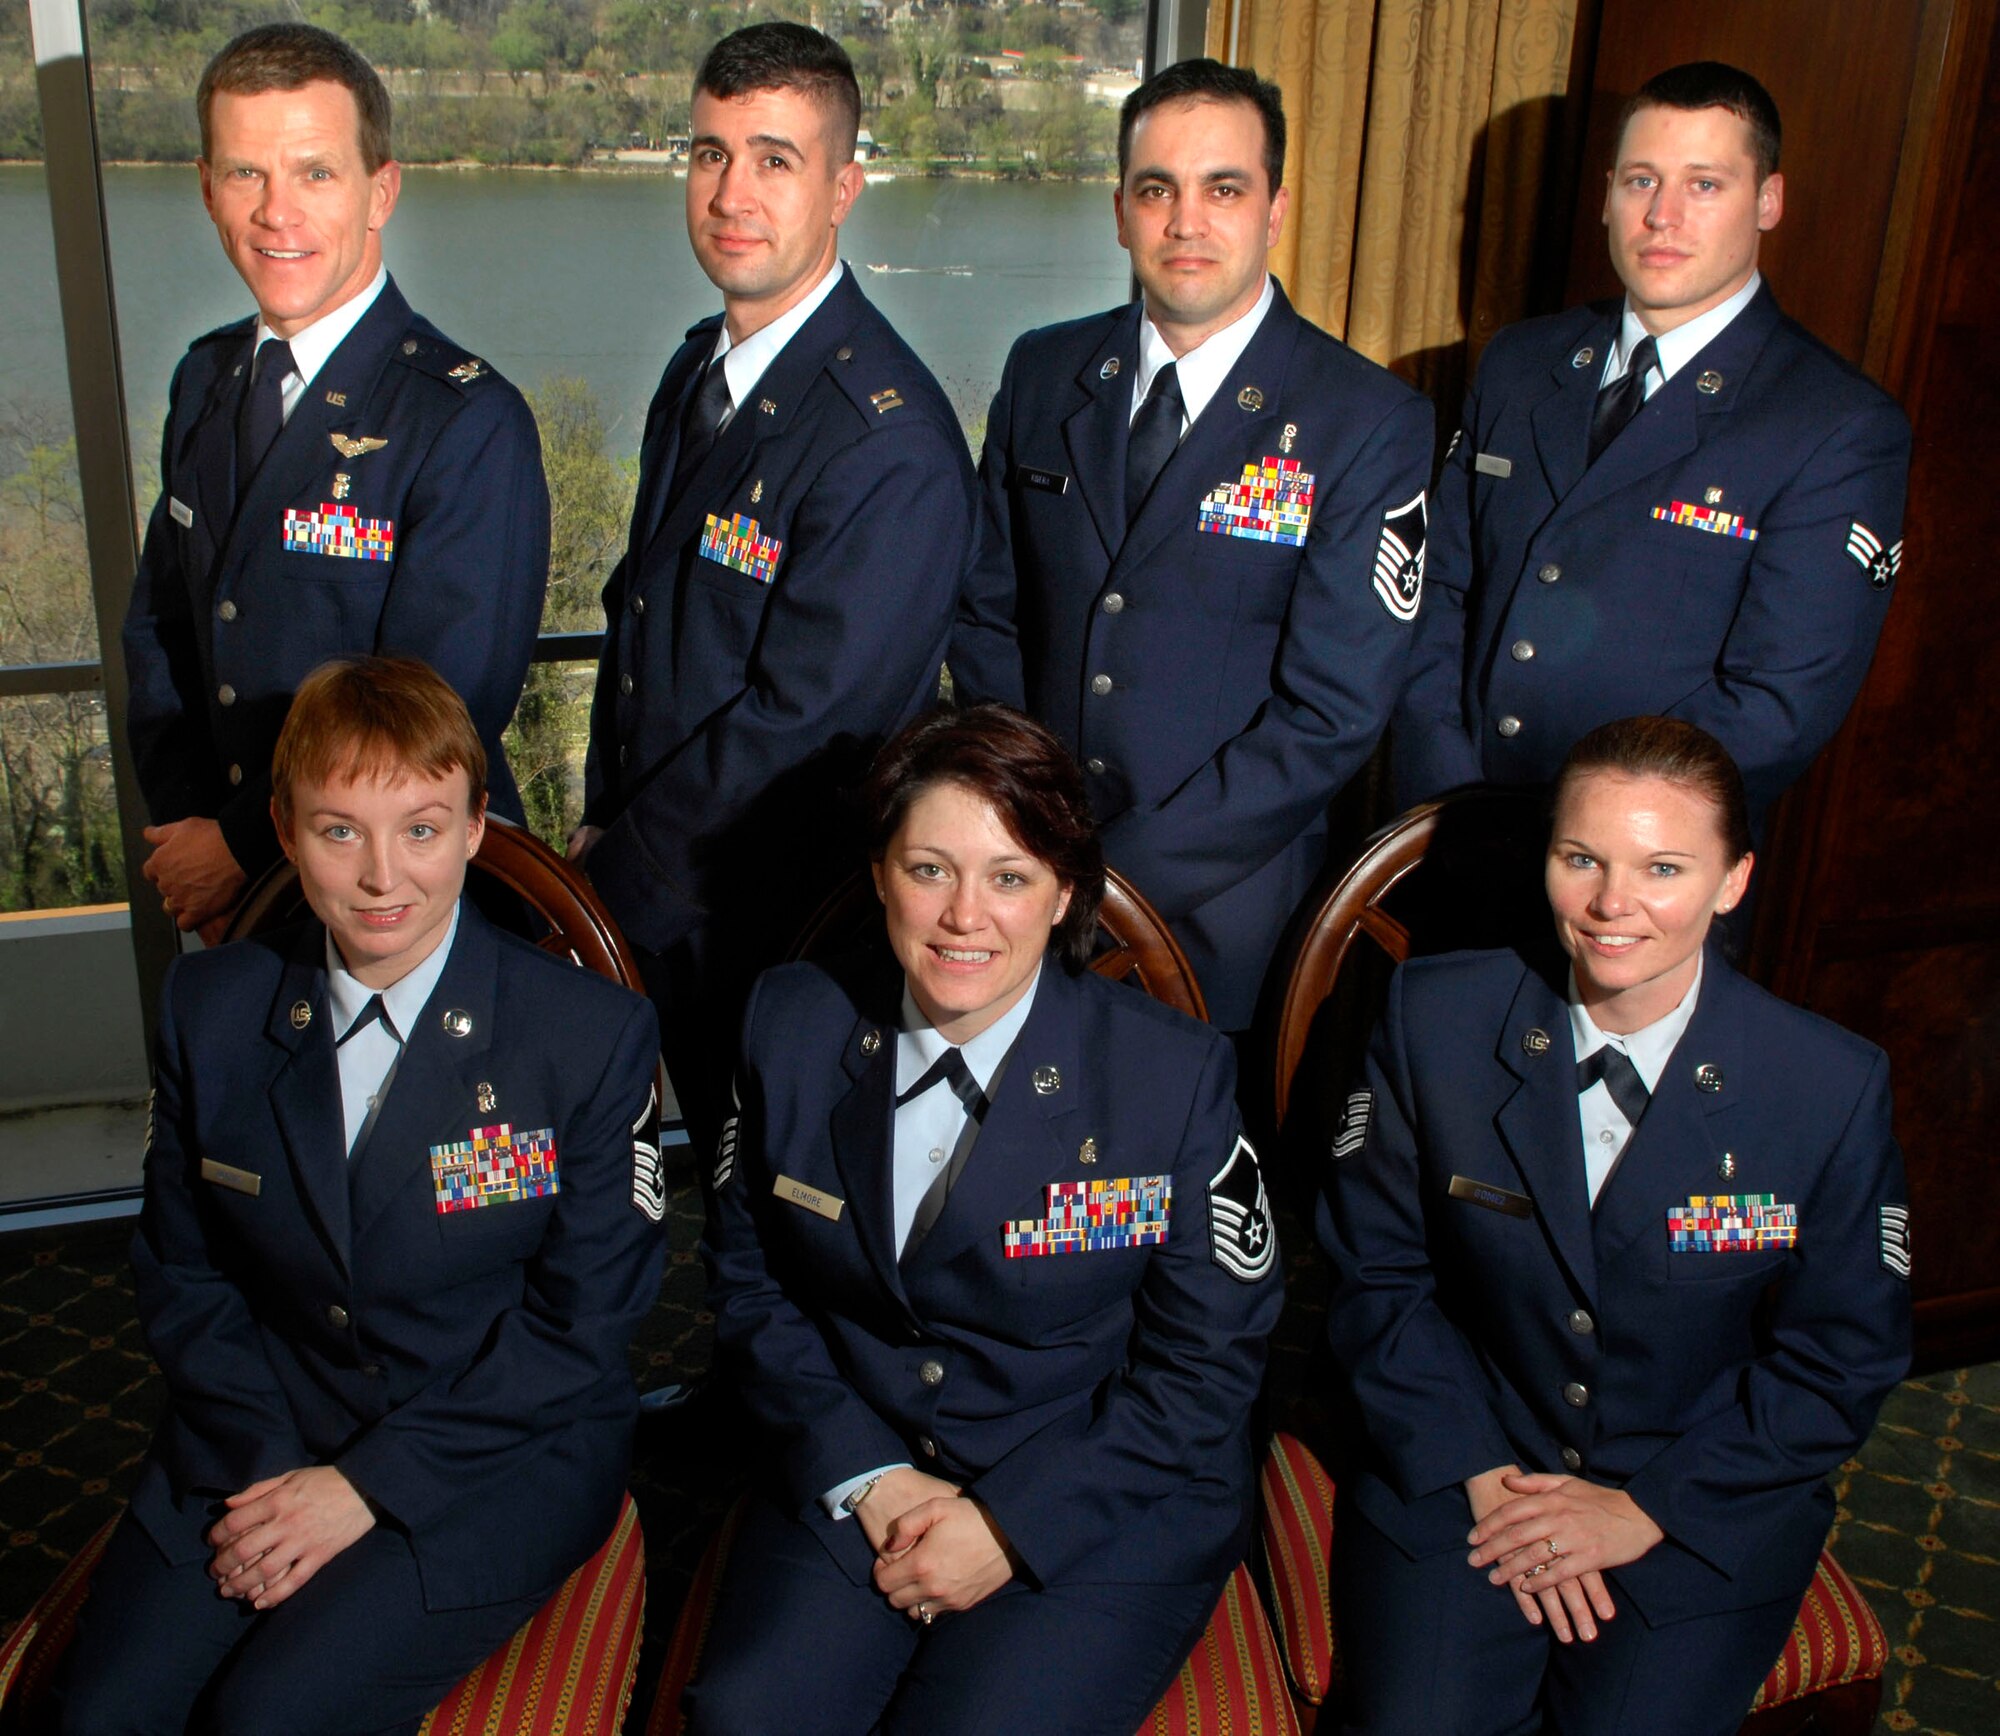 The members of the Air Force Association 2007 Team of the Year pose for a photo during their five-day visit to Washington, D.C. The expeditionary medics chosen for the annual AFA award are, in the front row from left, Master Sgt. Michelle Rootes, Master Sgt. Faith Elmore and Tech. Sgt. Crystal Gomez, and in the back row are Col. (Dr.) Jay Johannigman, Capt. Shaun Westphal, Master Sgt. Kory Rivera and Senior Airman Robert Zuniga II. (U.S. Air Force photo/Tech. Sgt. Cohen A. Young)